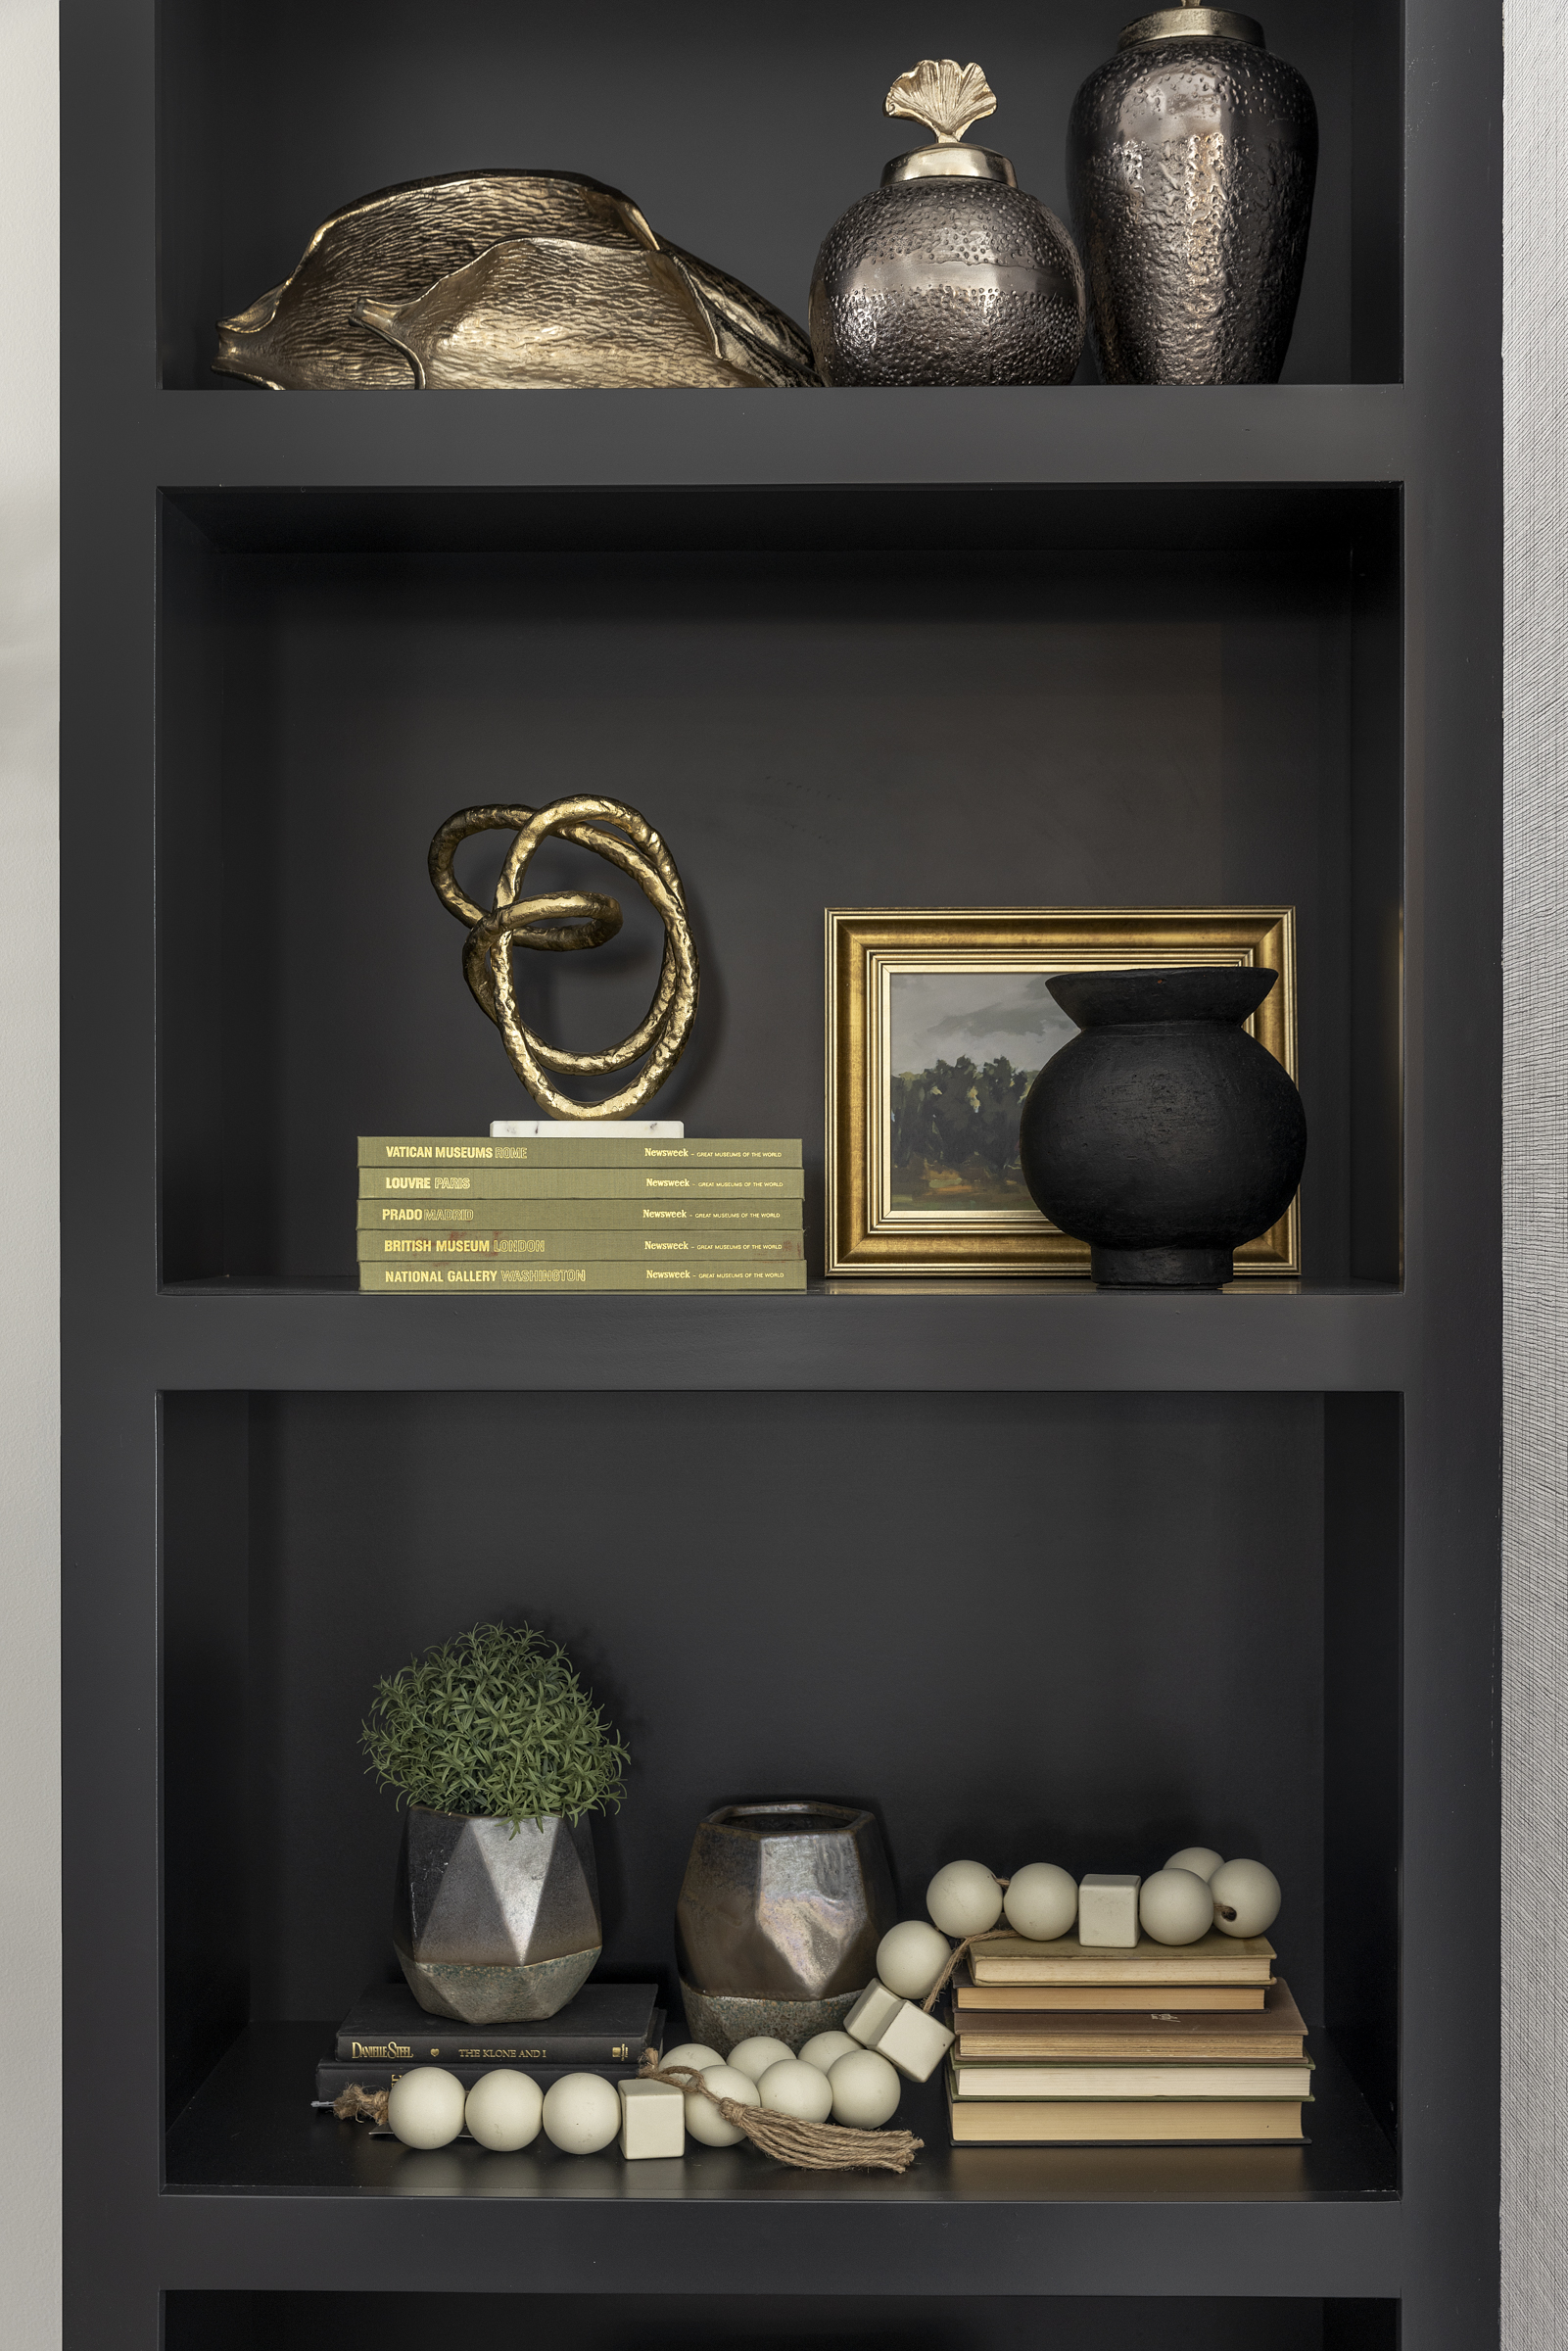 close up look at black built in shelving furnished and decorated with gold accent pieces, picture frames, vases, and books